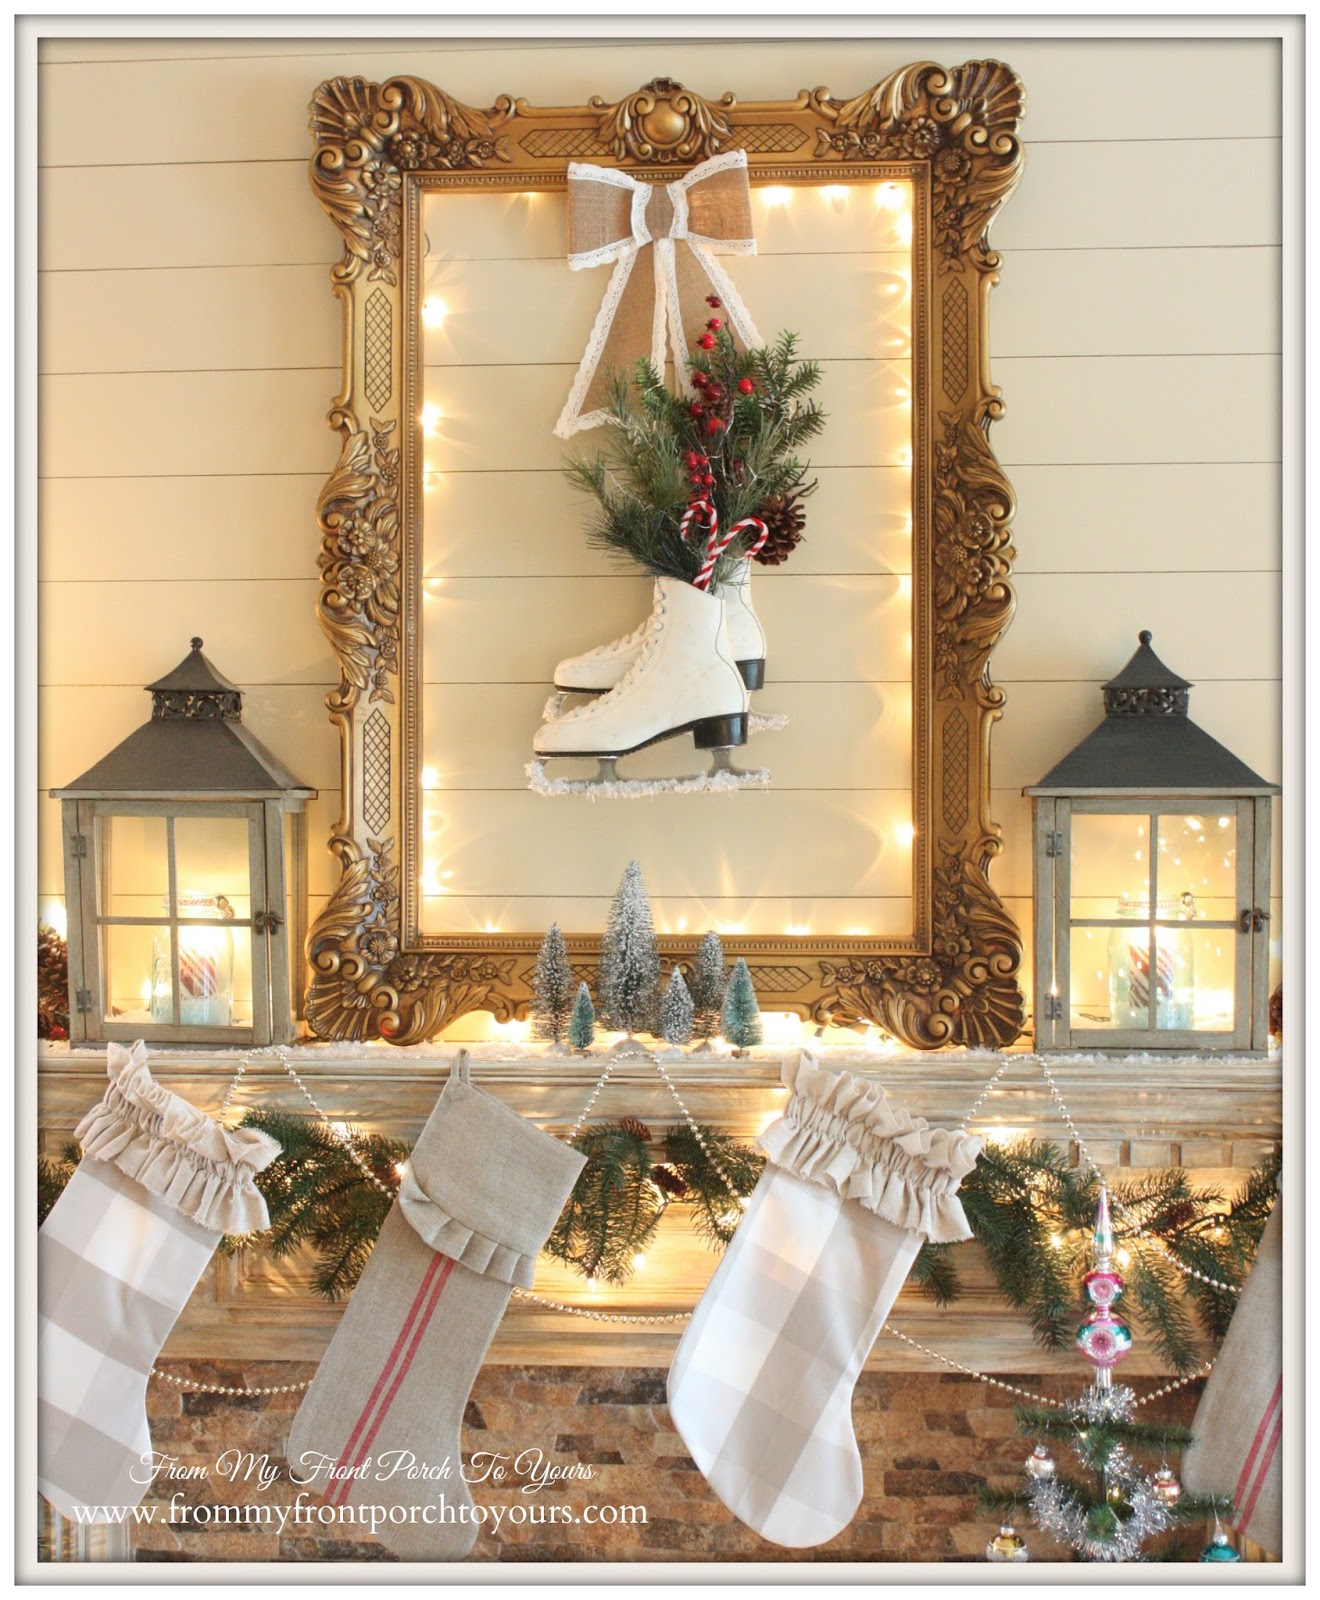 French Farmhouse Vintage Christmas Mantel 2014-Buffalo Check Stockings- From My Front Porch To Yours